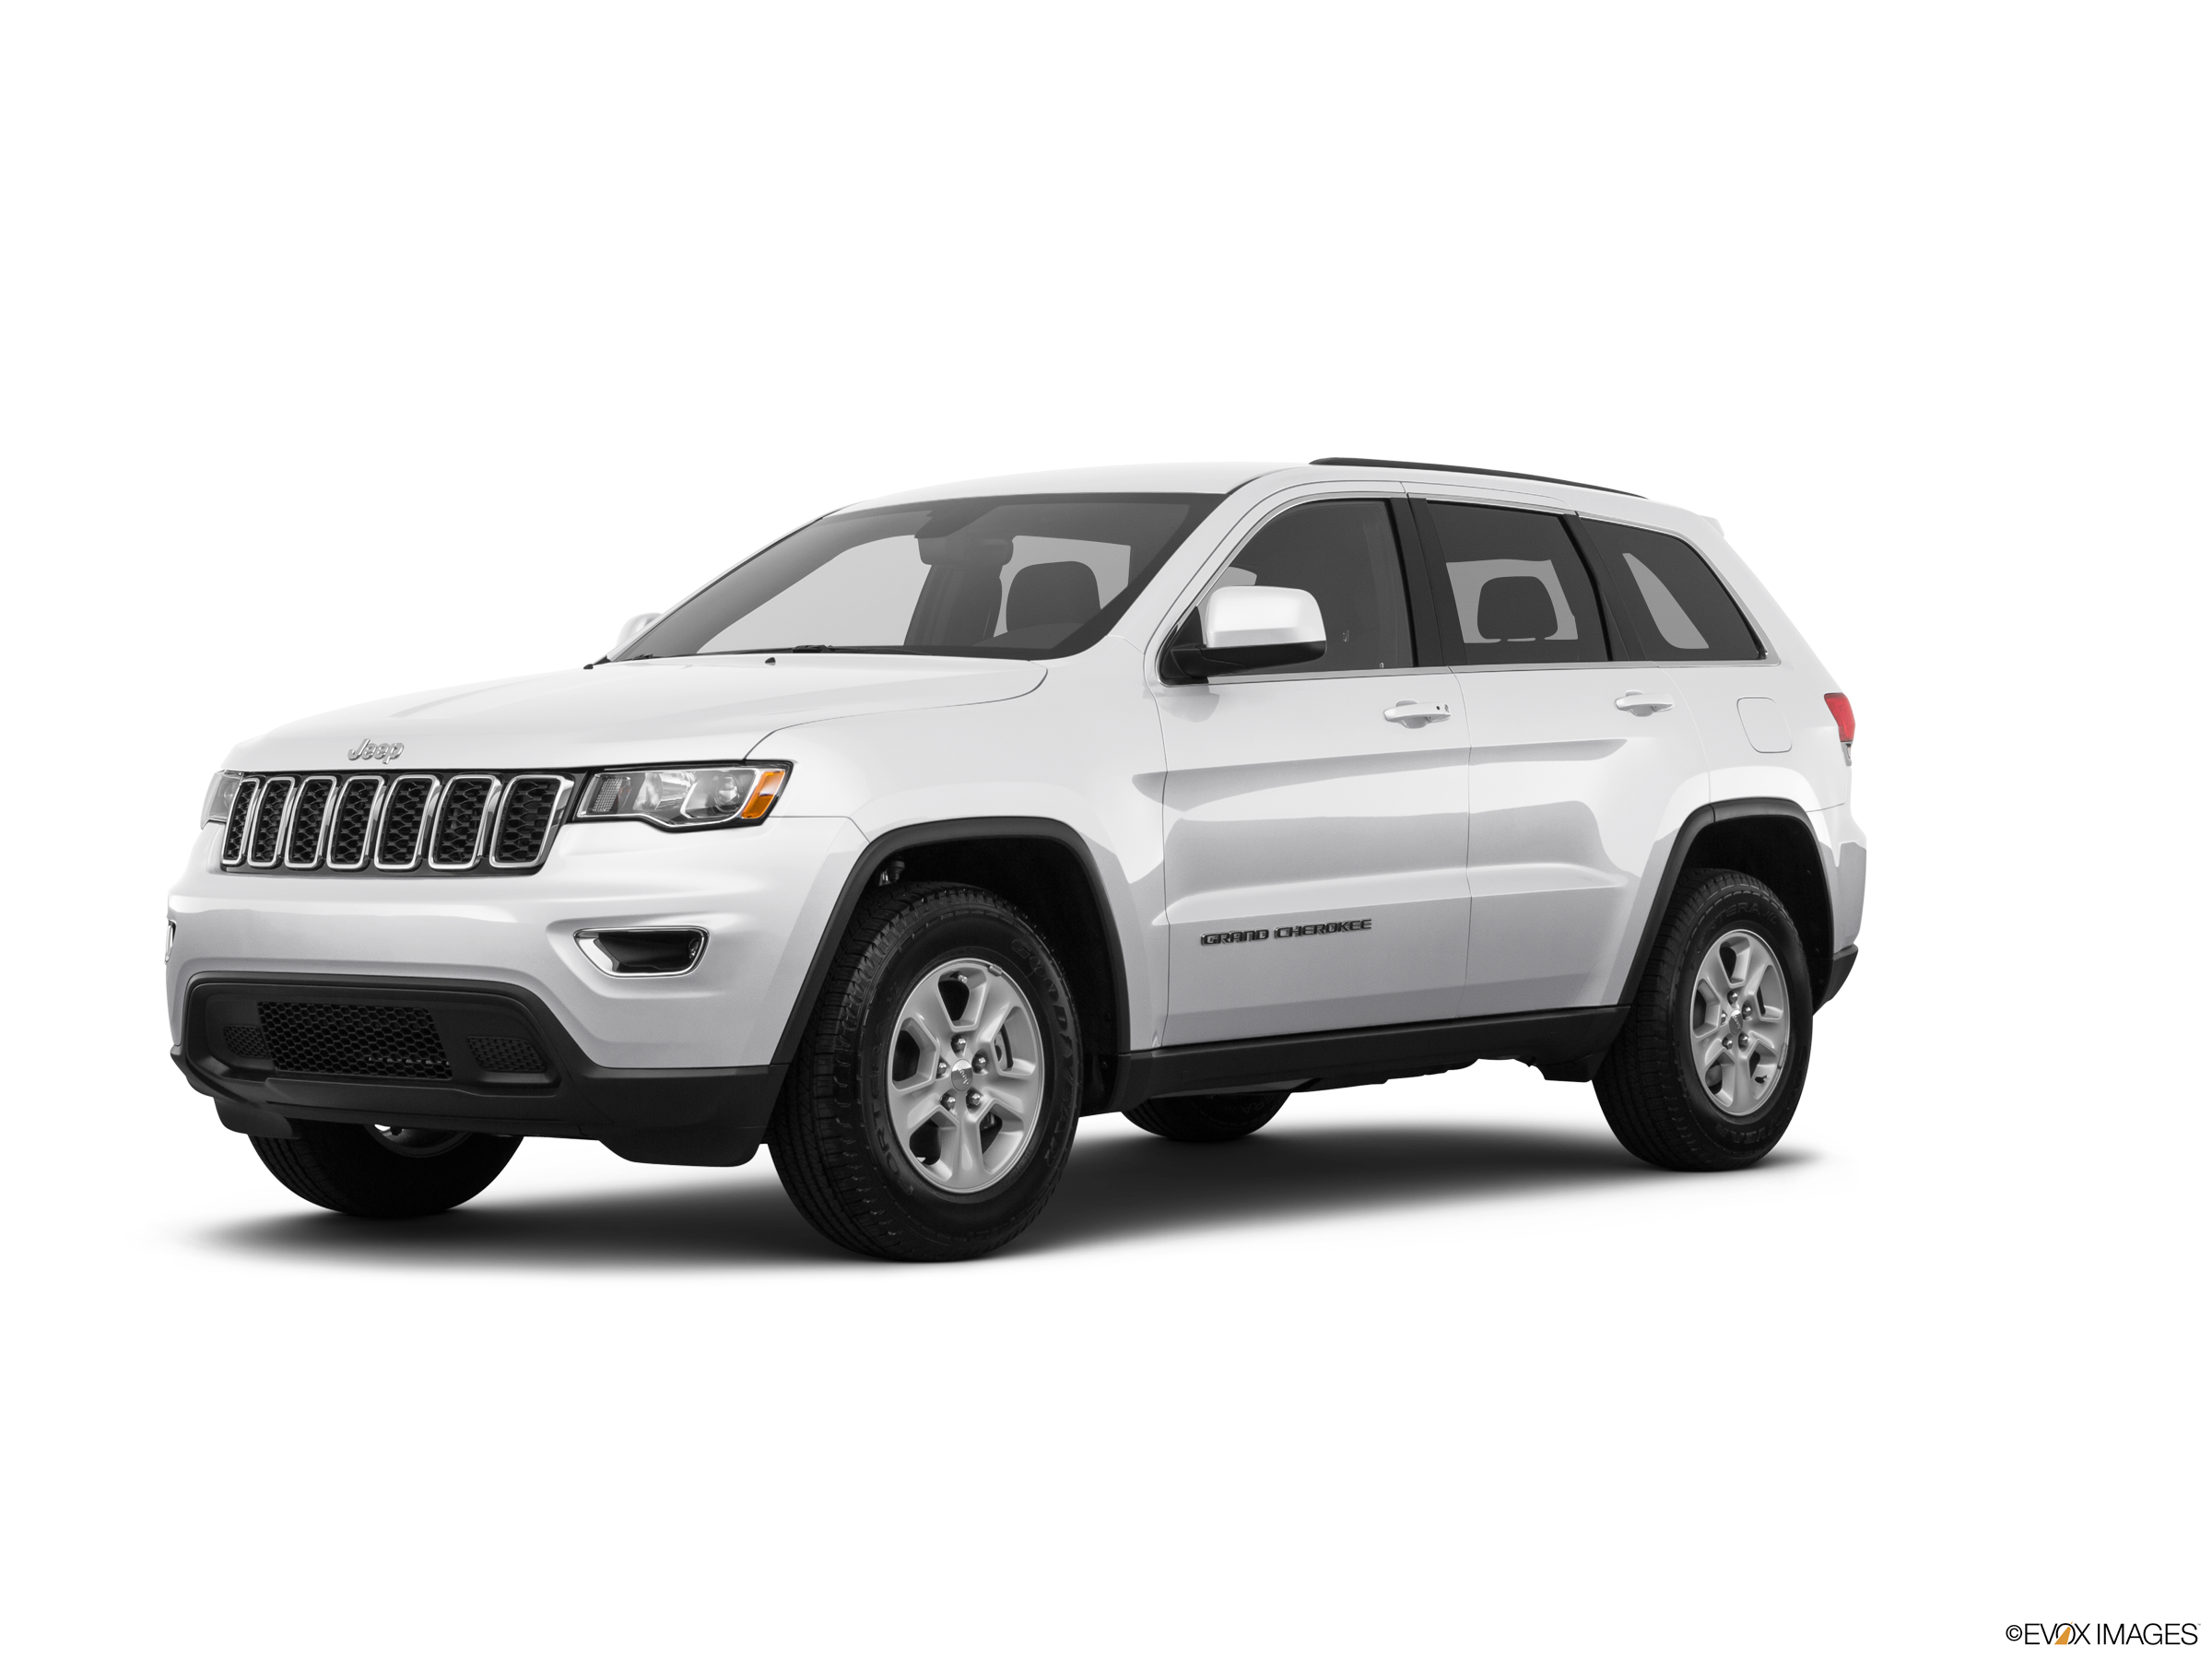 2018 Jeep Grand Cherokee Values  Cars for Sale | Kelley Blue Book